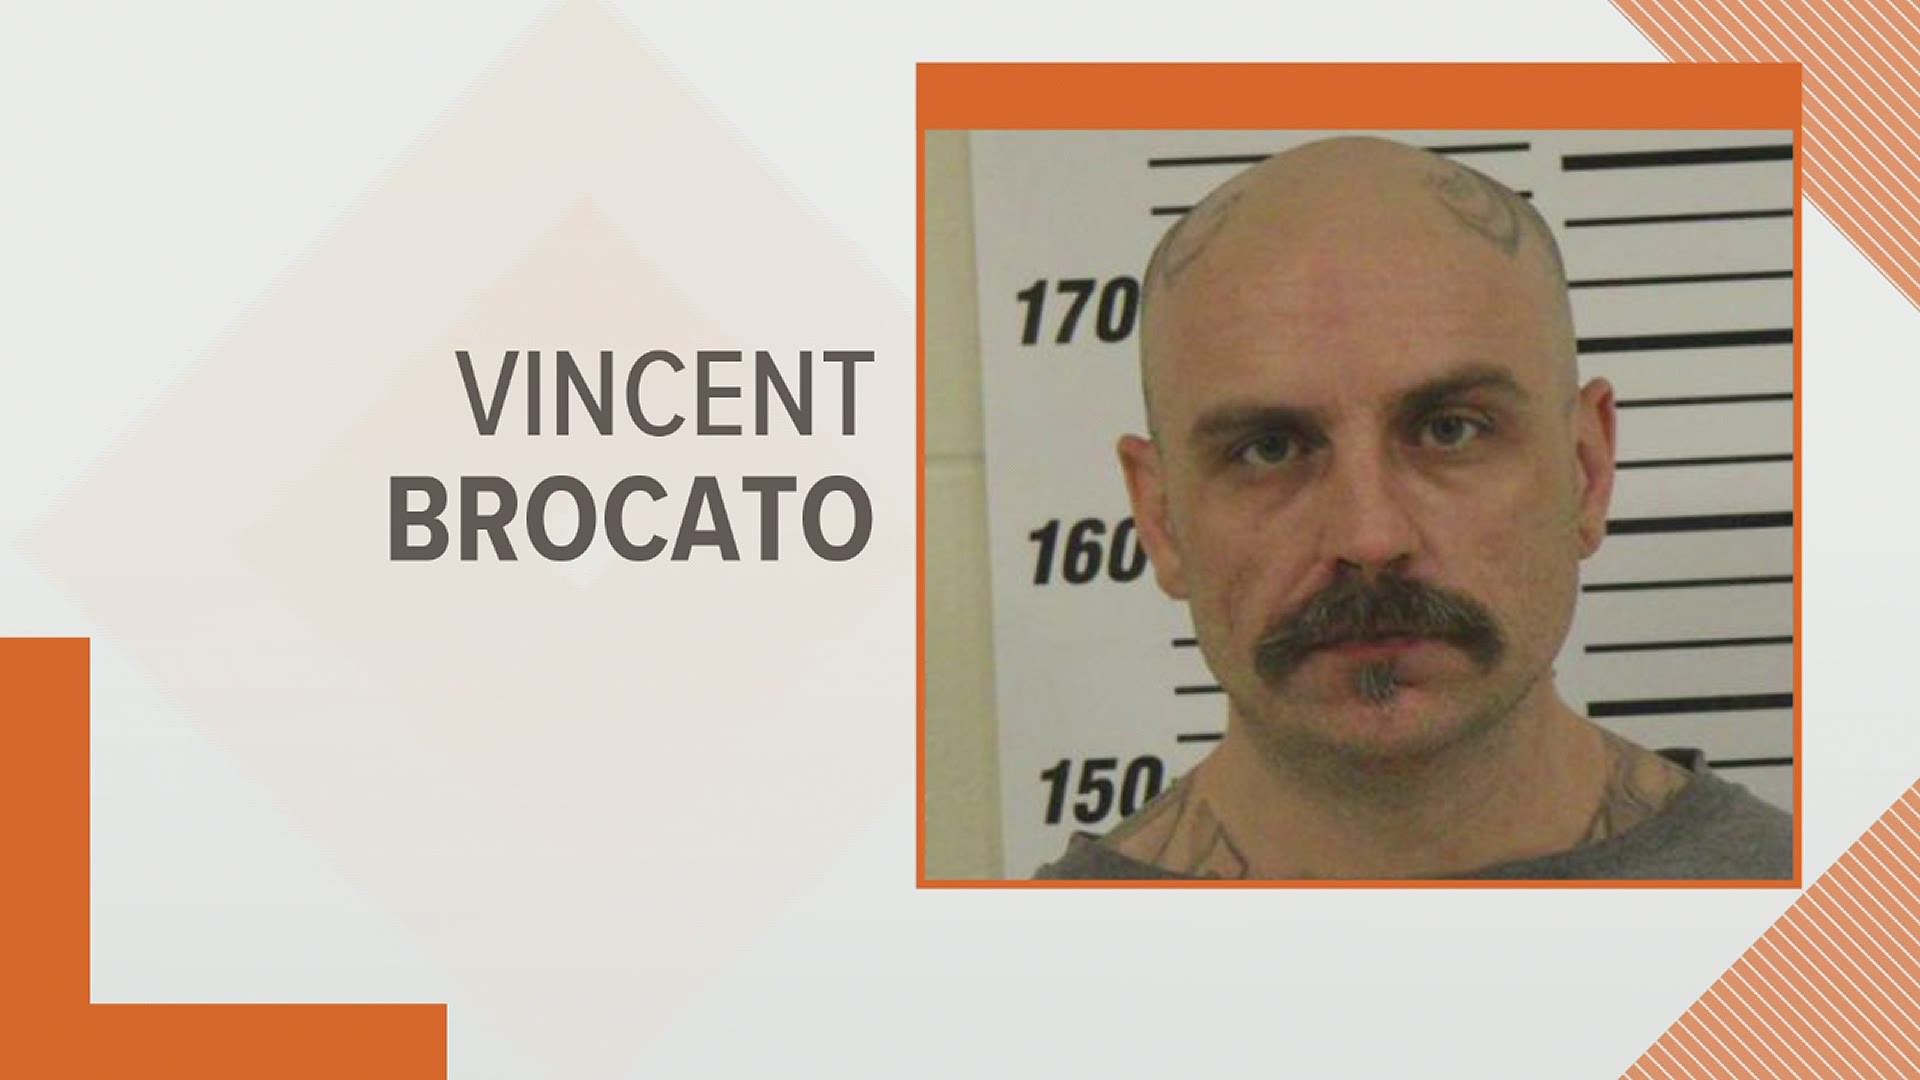 Vincent Brocato, 39, from Davenport, was charged with attempted murder after a shooting incident early Wednesday, Feb. 17, 2021.